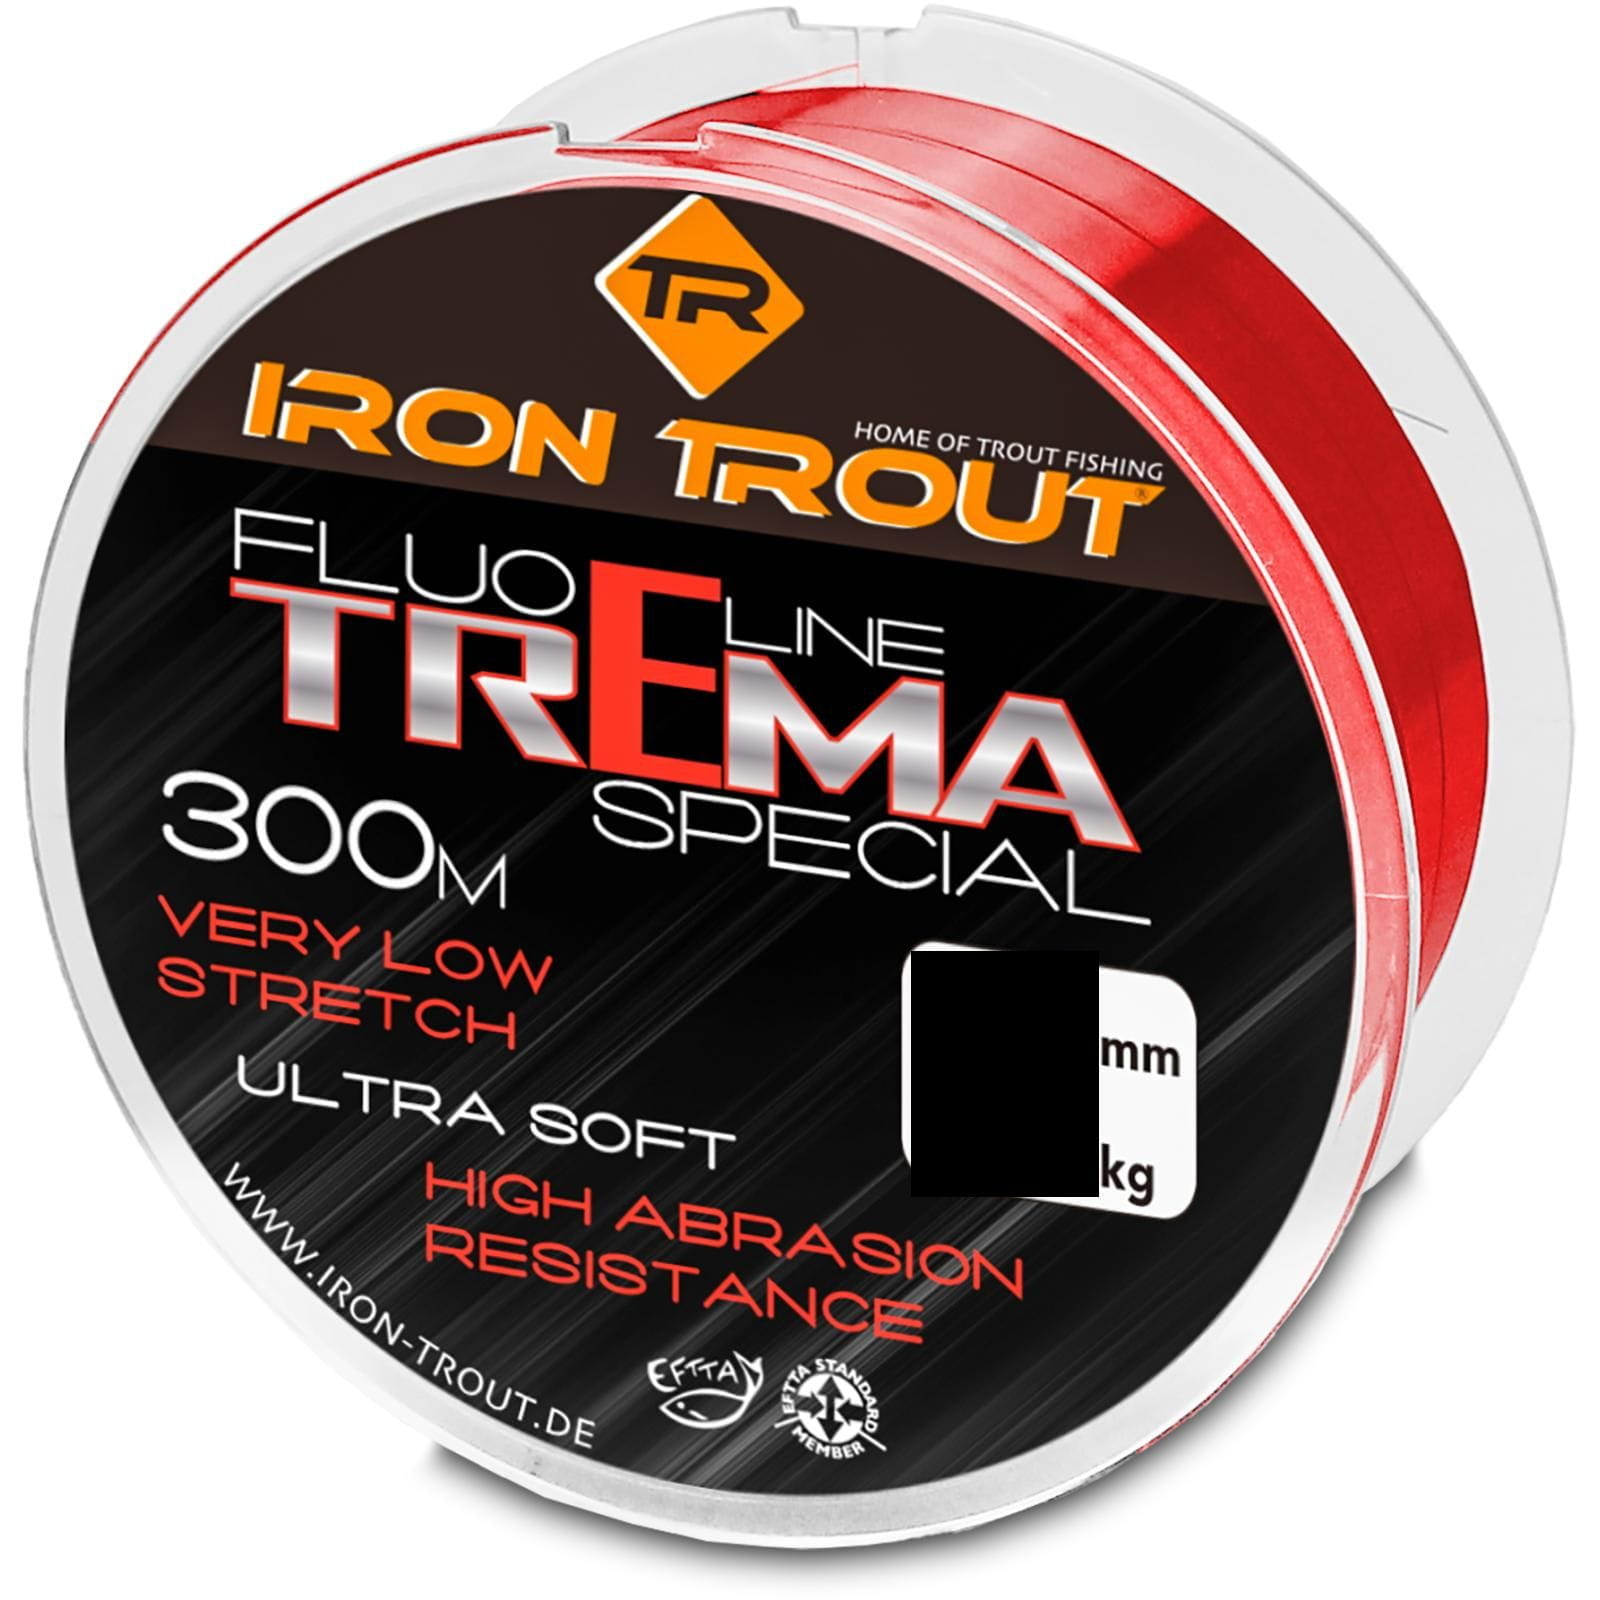 Iron Trout Trema Special 0,20 mm 3,20 kg 300 Meter Fluo Piros